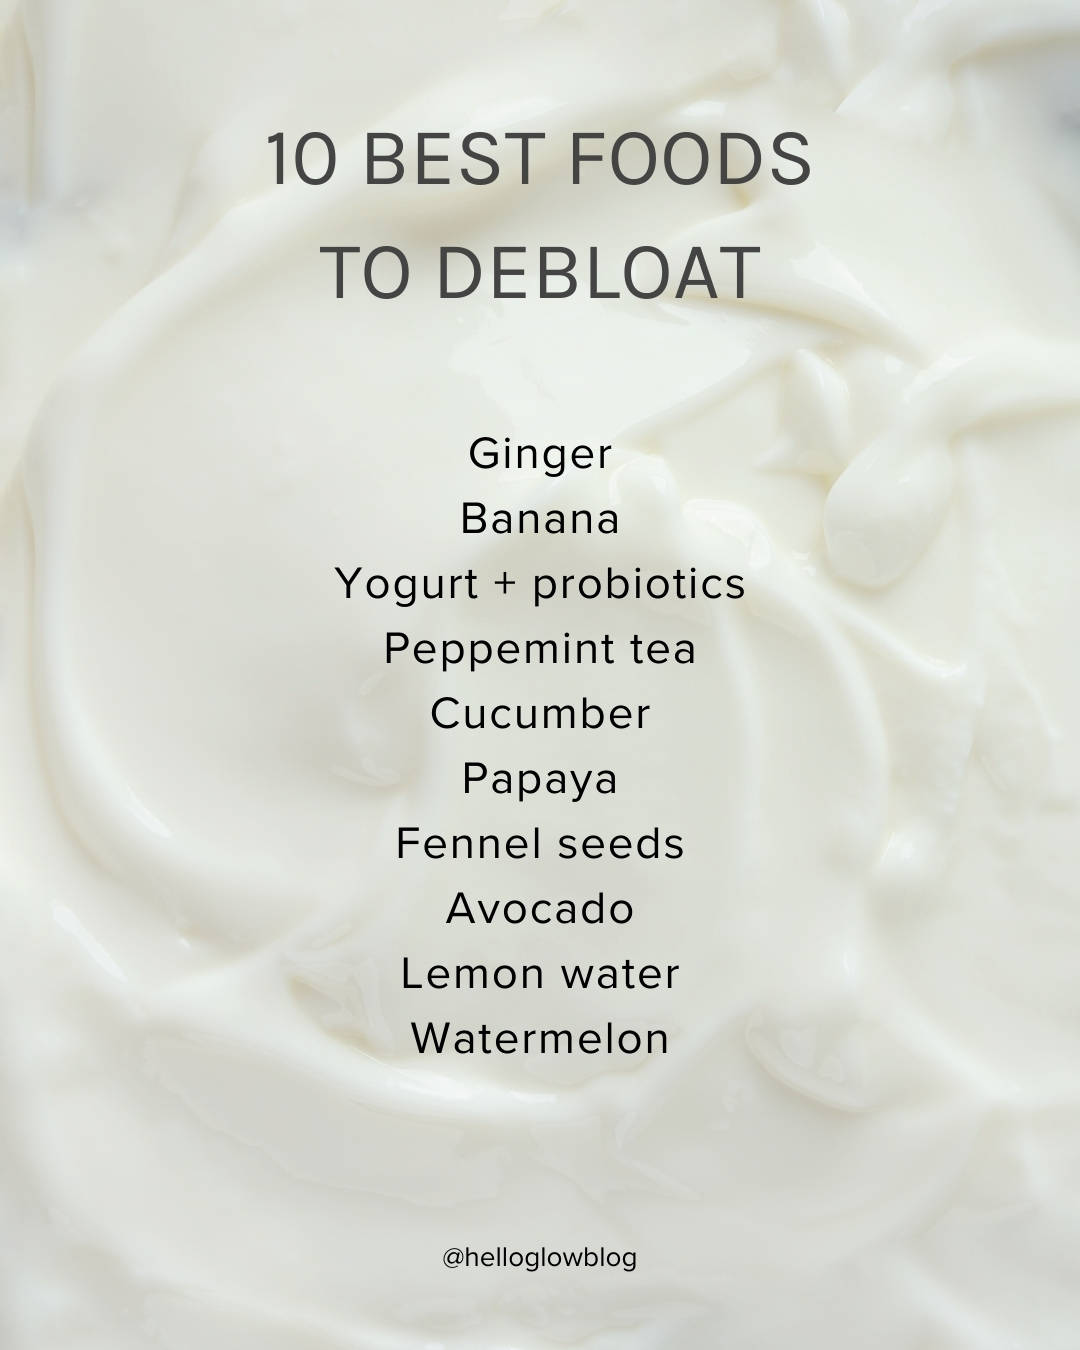 14 Simple Recipes That Will Help You Debloat - Fast!